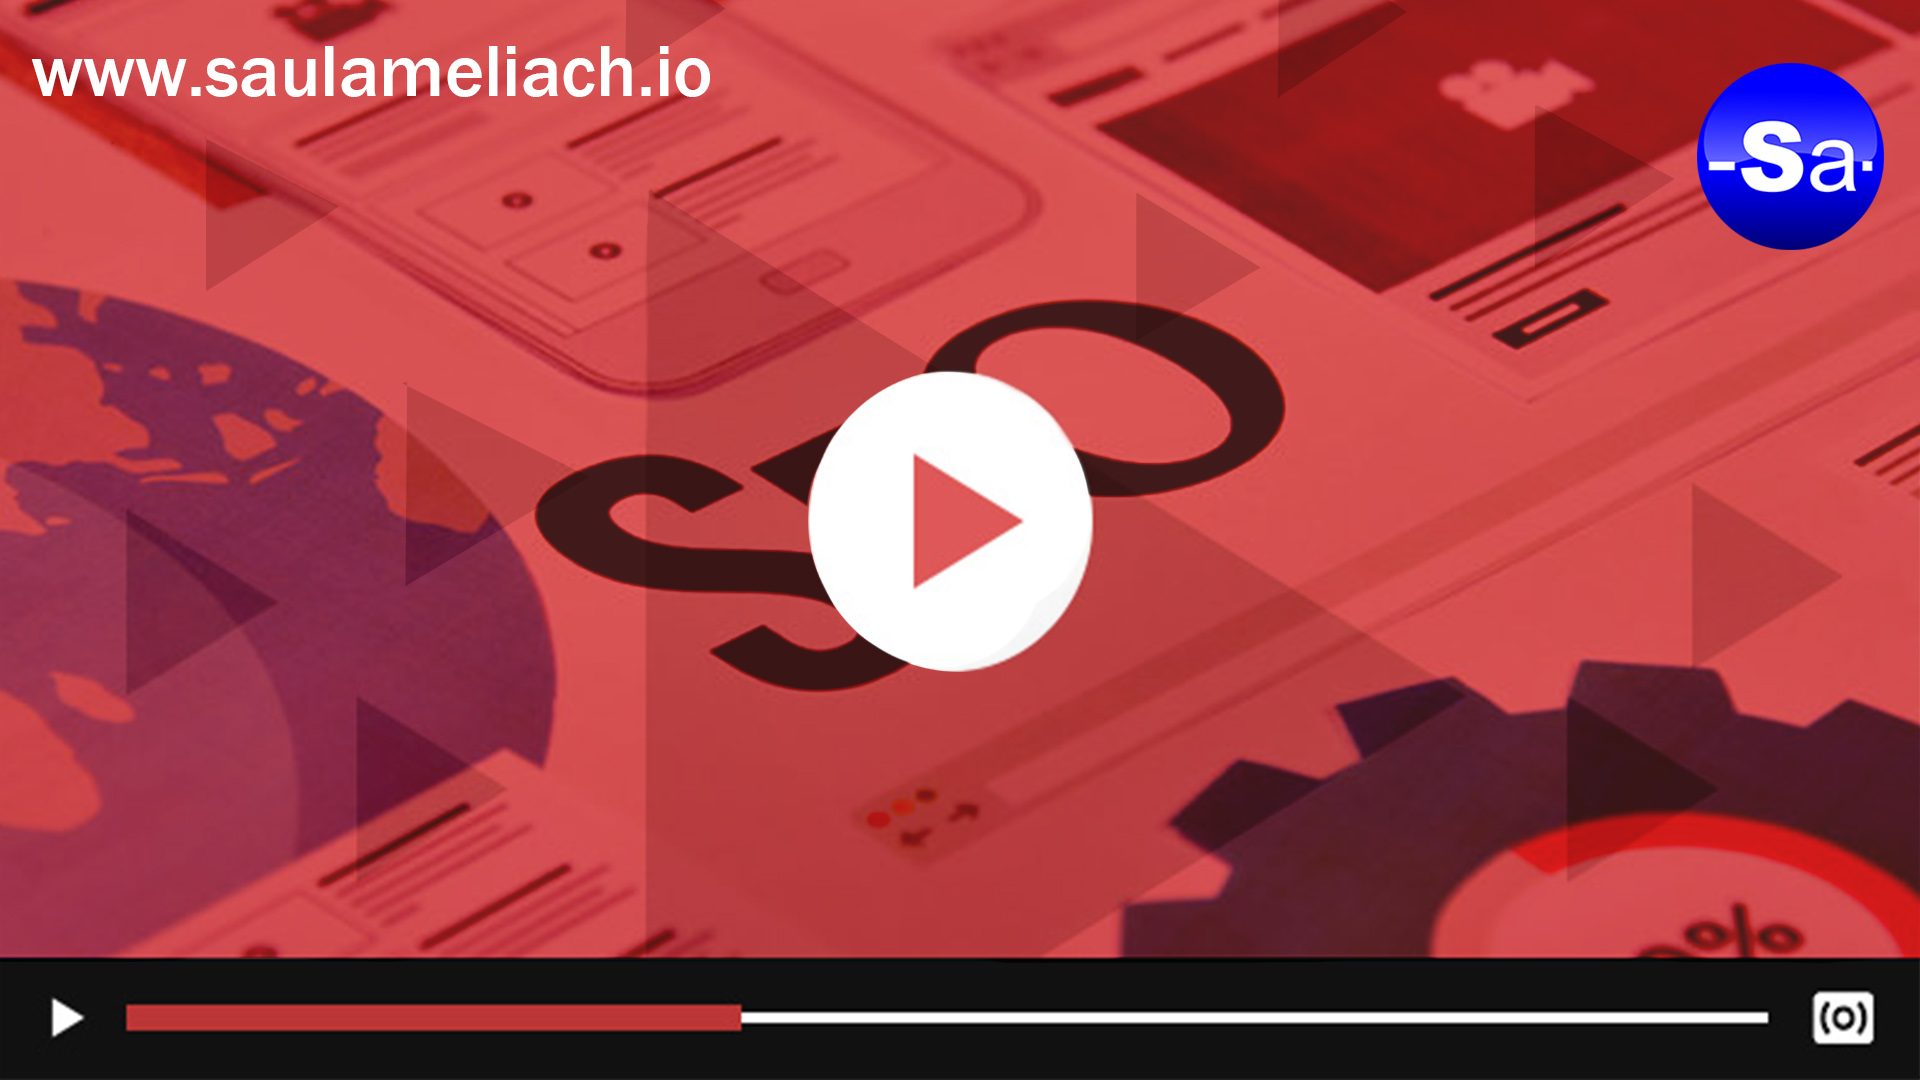 The videos are even more important in SEO - saul ameliach